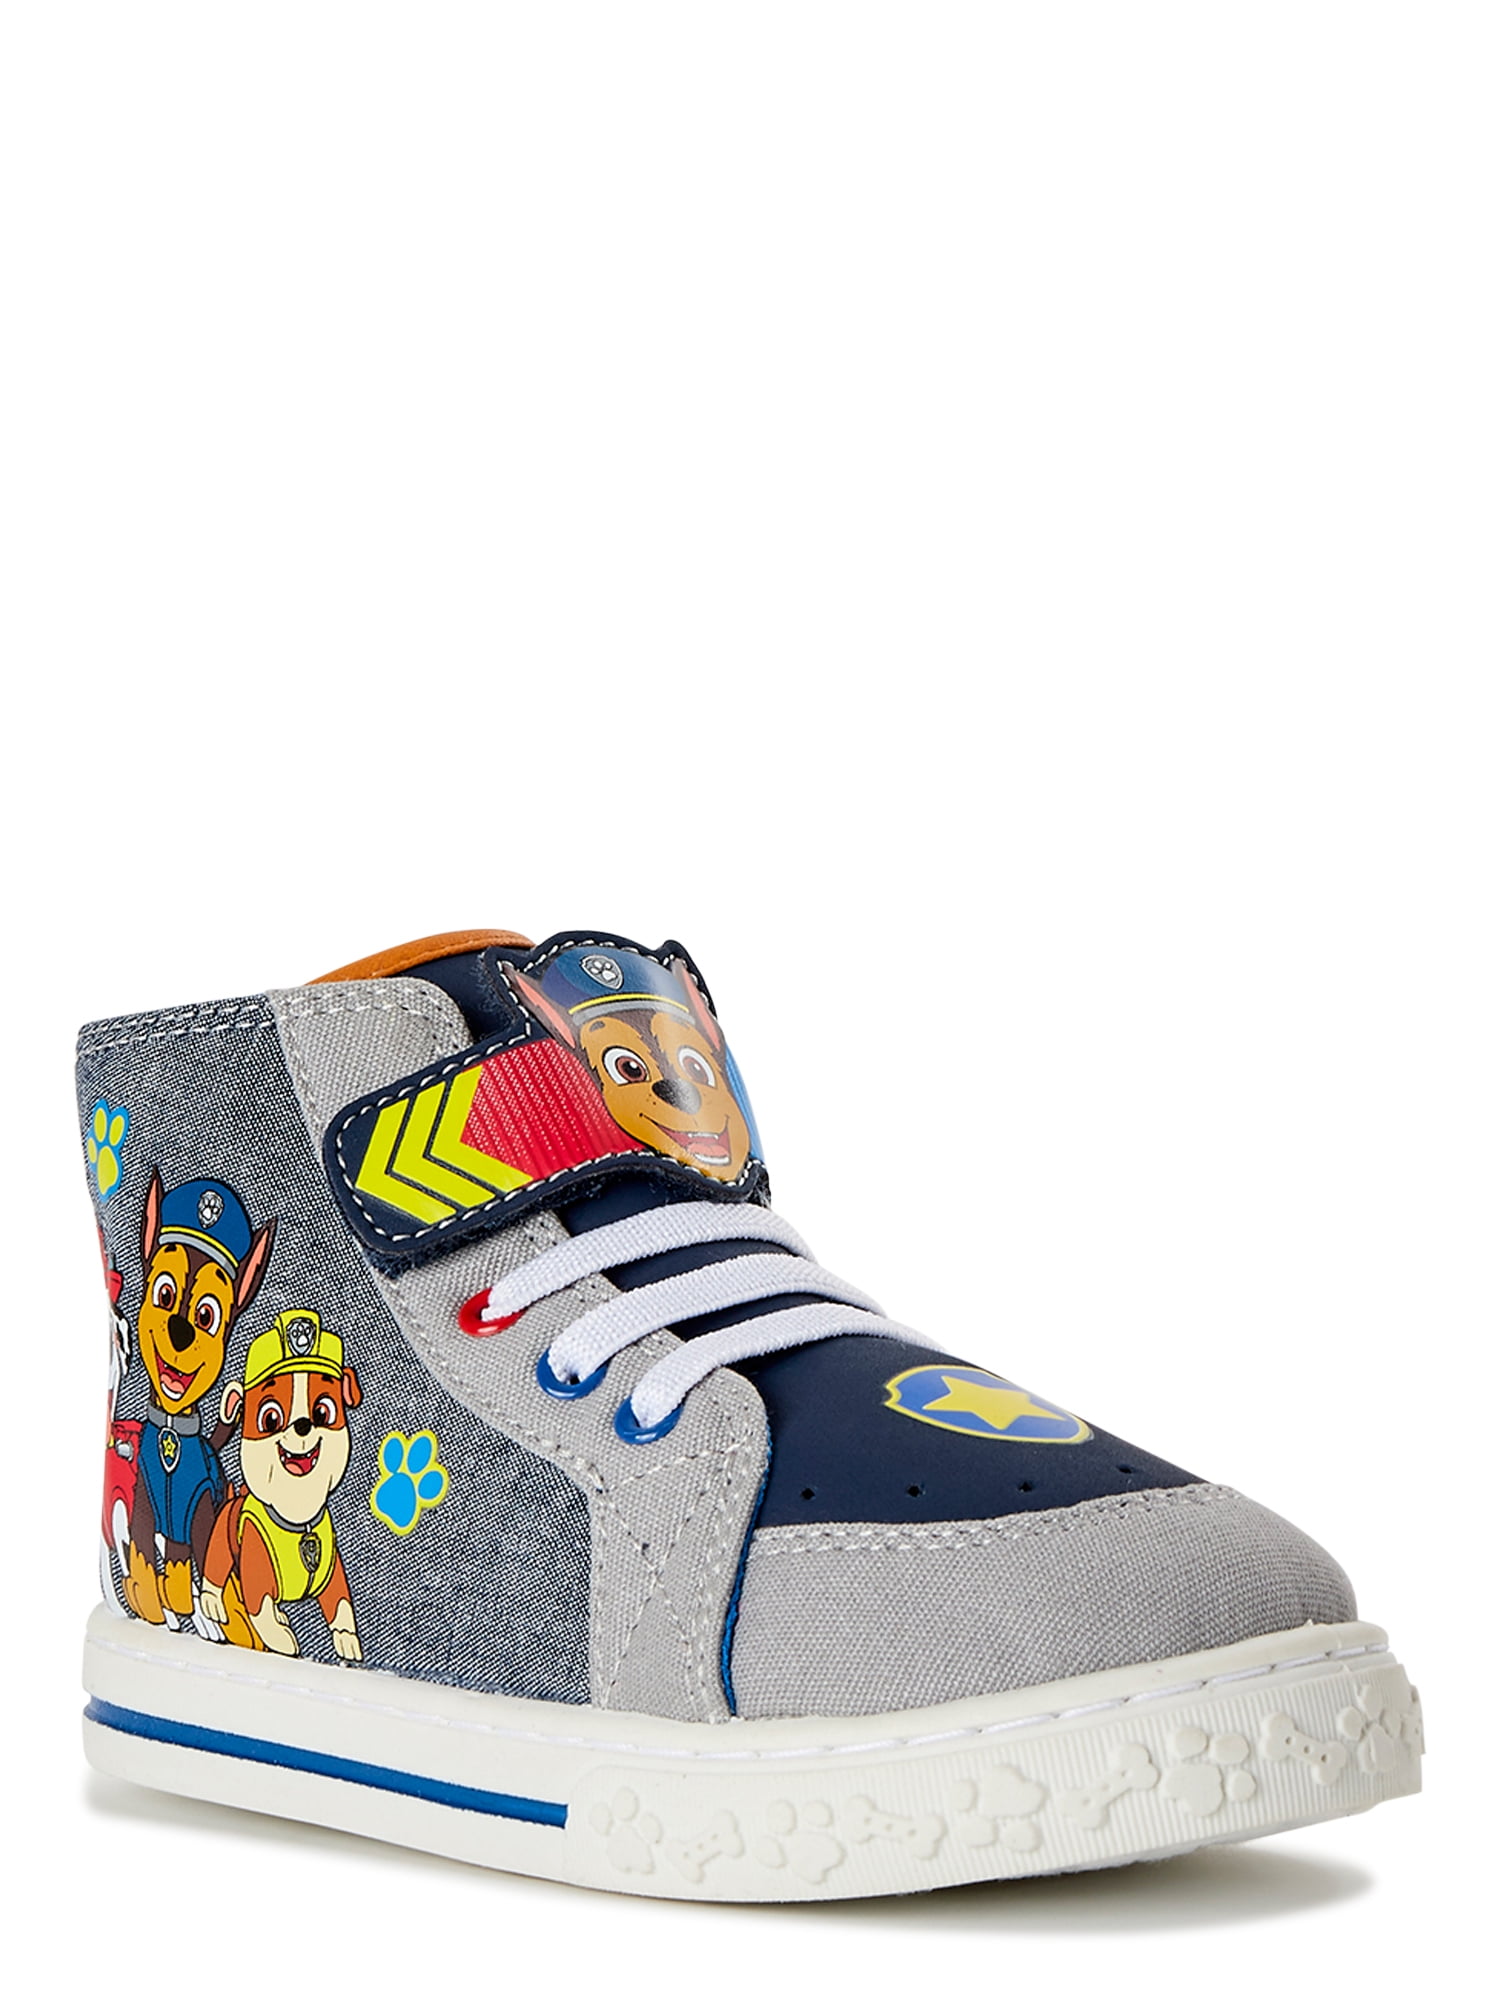 Chase Marshall and Rubble PAW Patrol Casual Canvas Shoes for Toddler Boys feat 